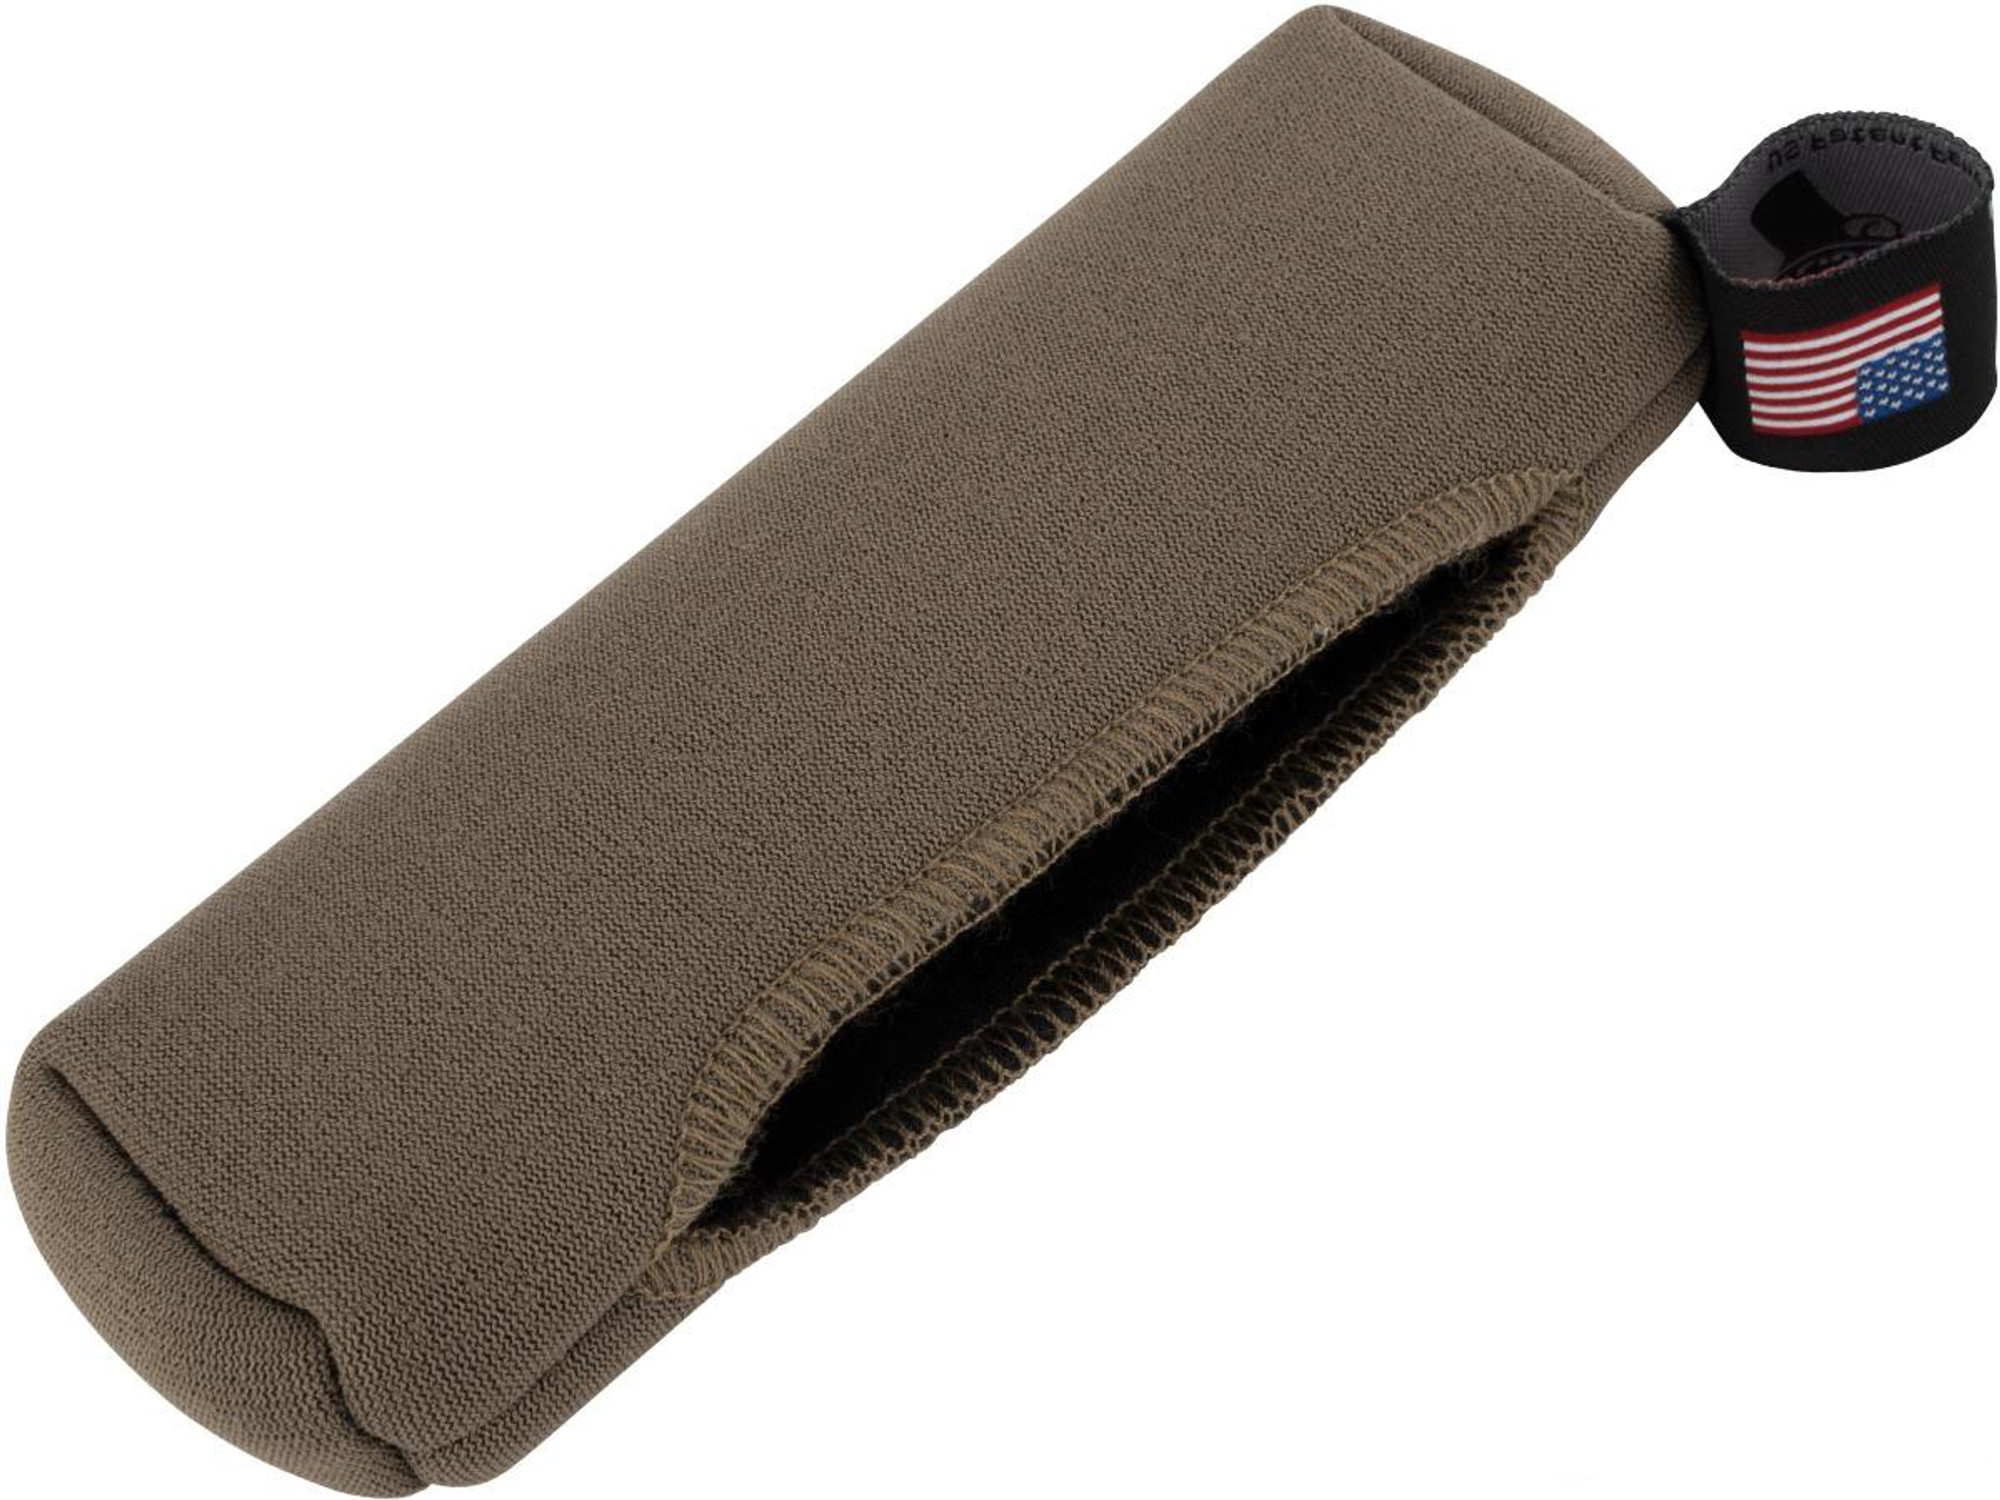 Sentry Slide Boot Protective Slide Cover for Semi-Automatic Pistols (Color: Dark Earth / Sub Compact Frame)